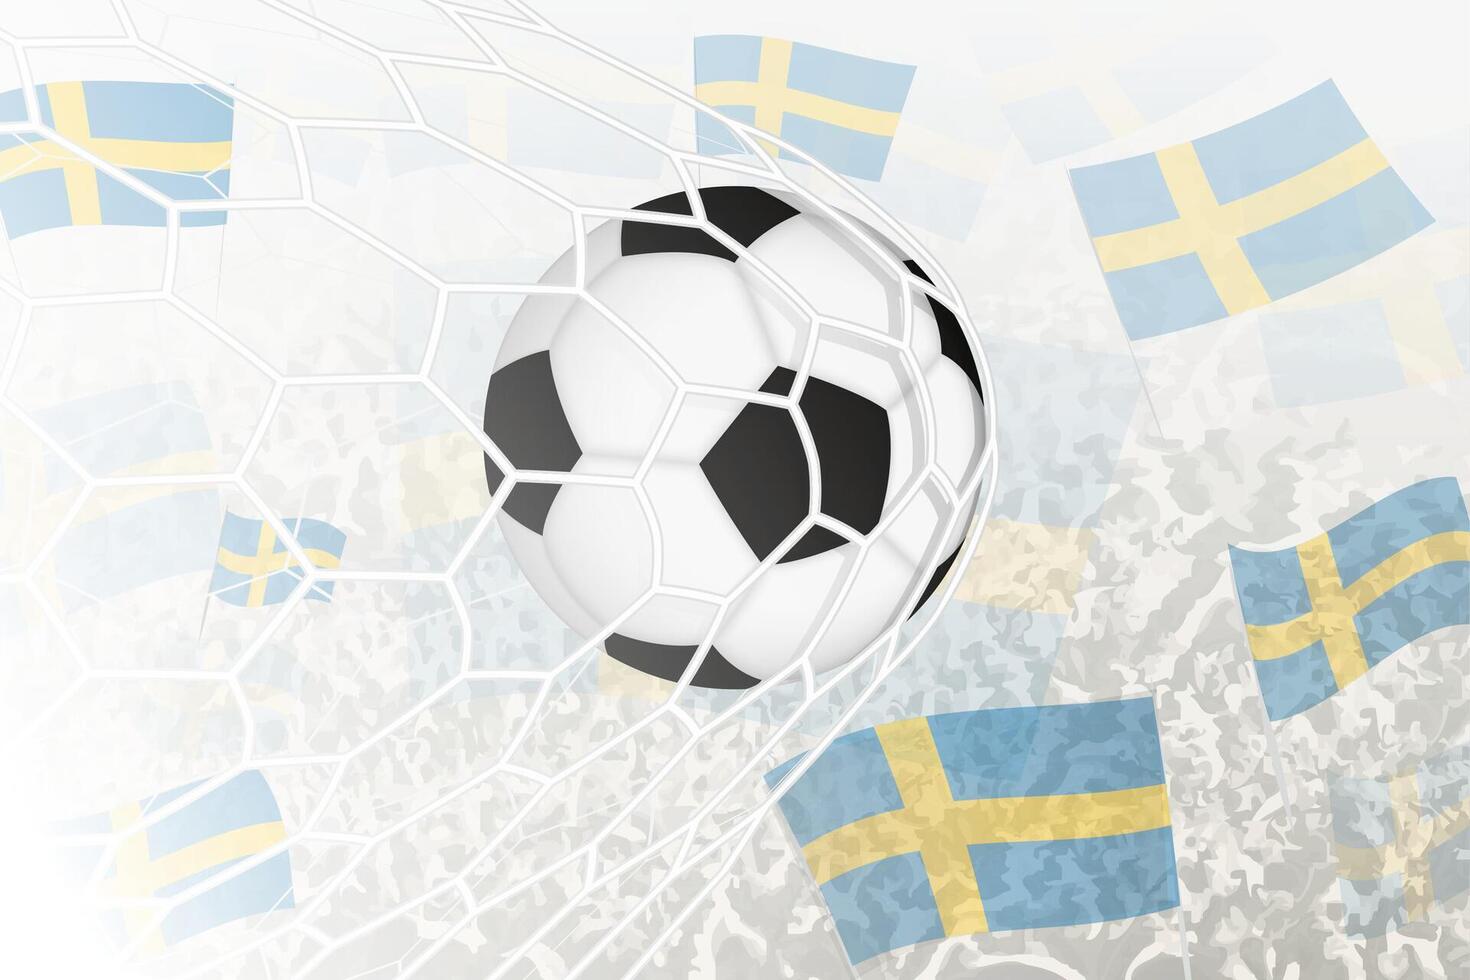 National Football team of Sweden scored goal. Ball in goal net, while football supporters are waving the Sweden flag in the background. vector